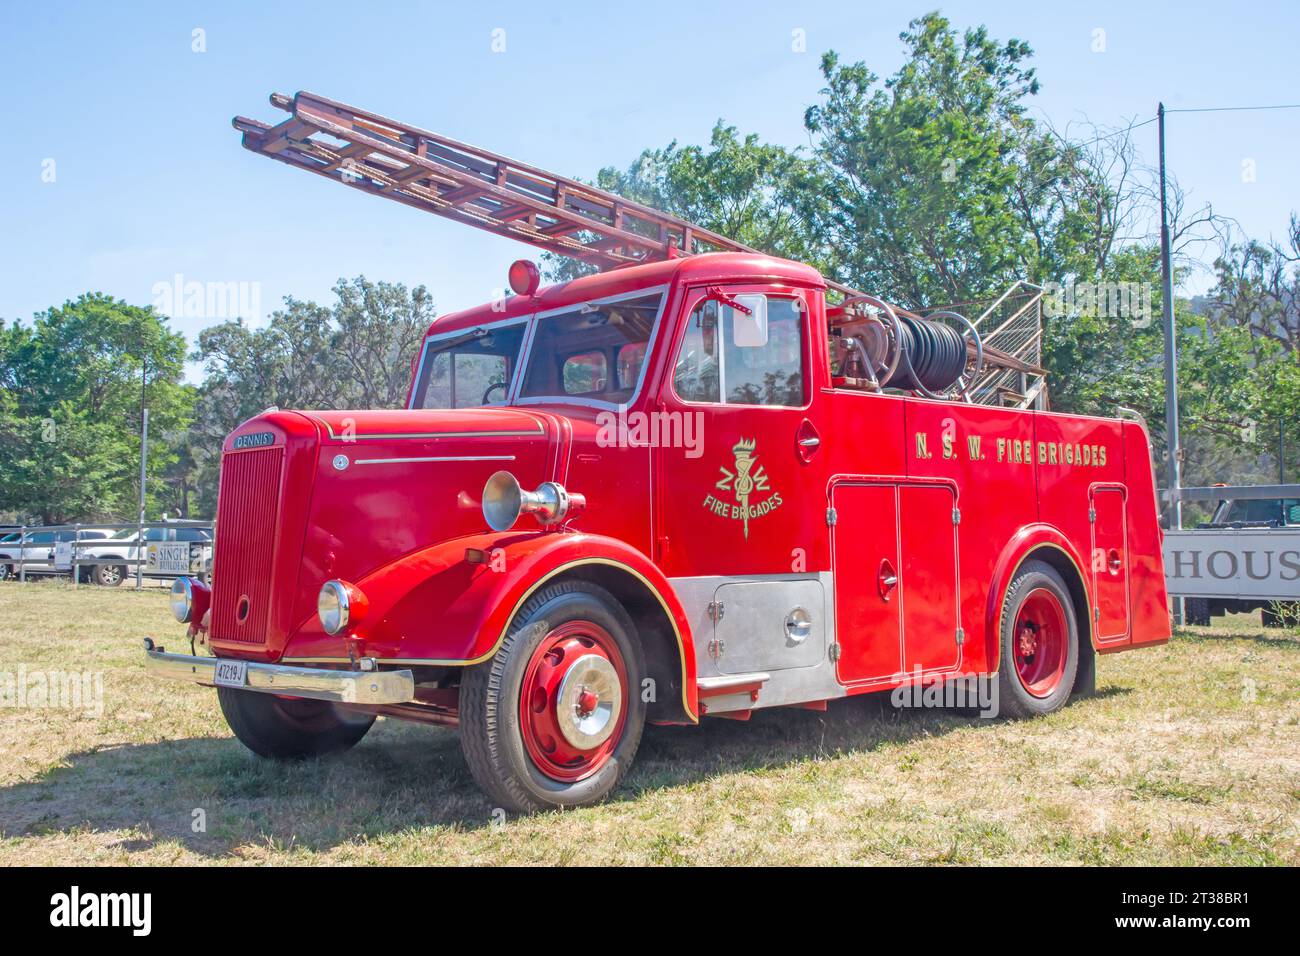 Vintage Dennis NSW  Fire brigade truck on display at a country fair in Australia. Stock Photo